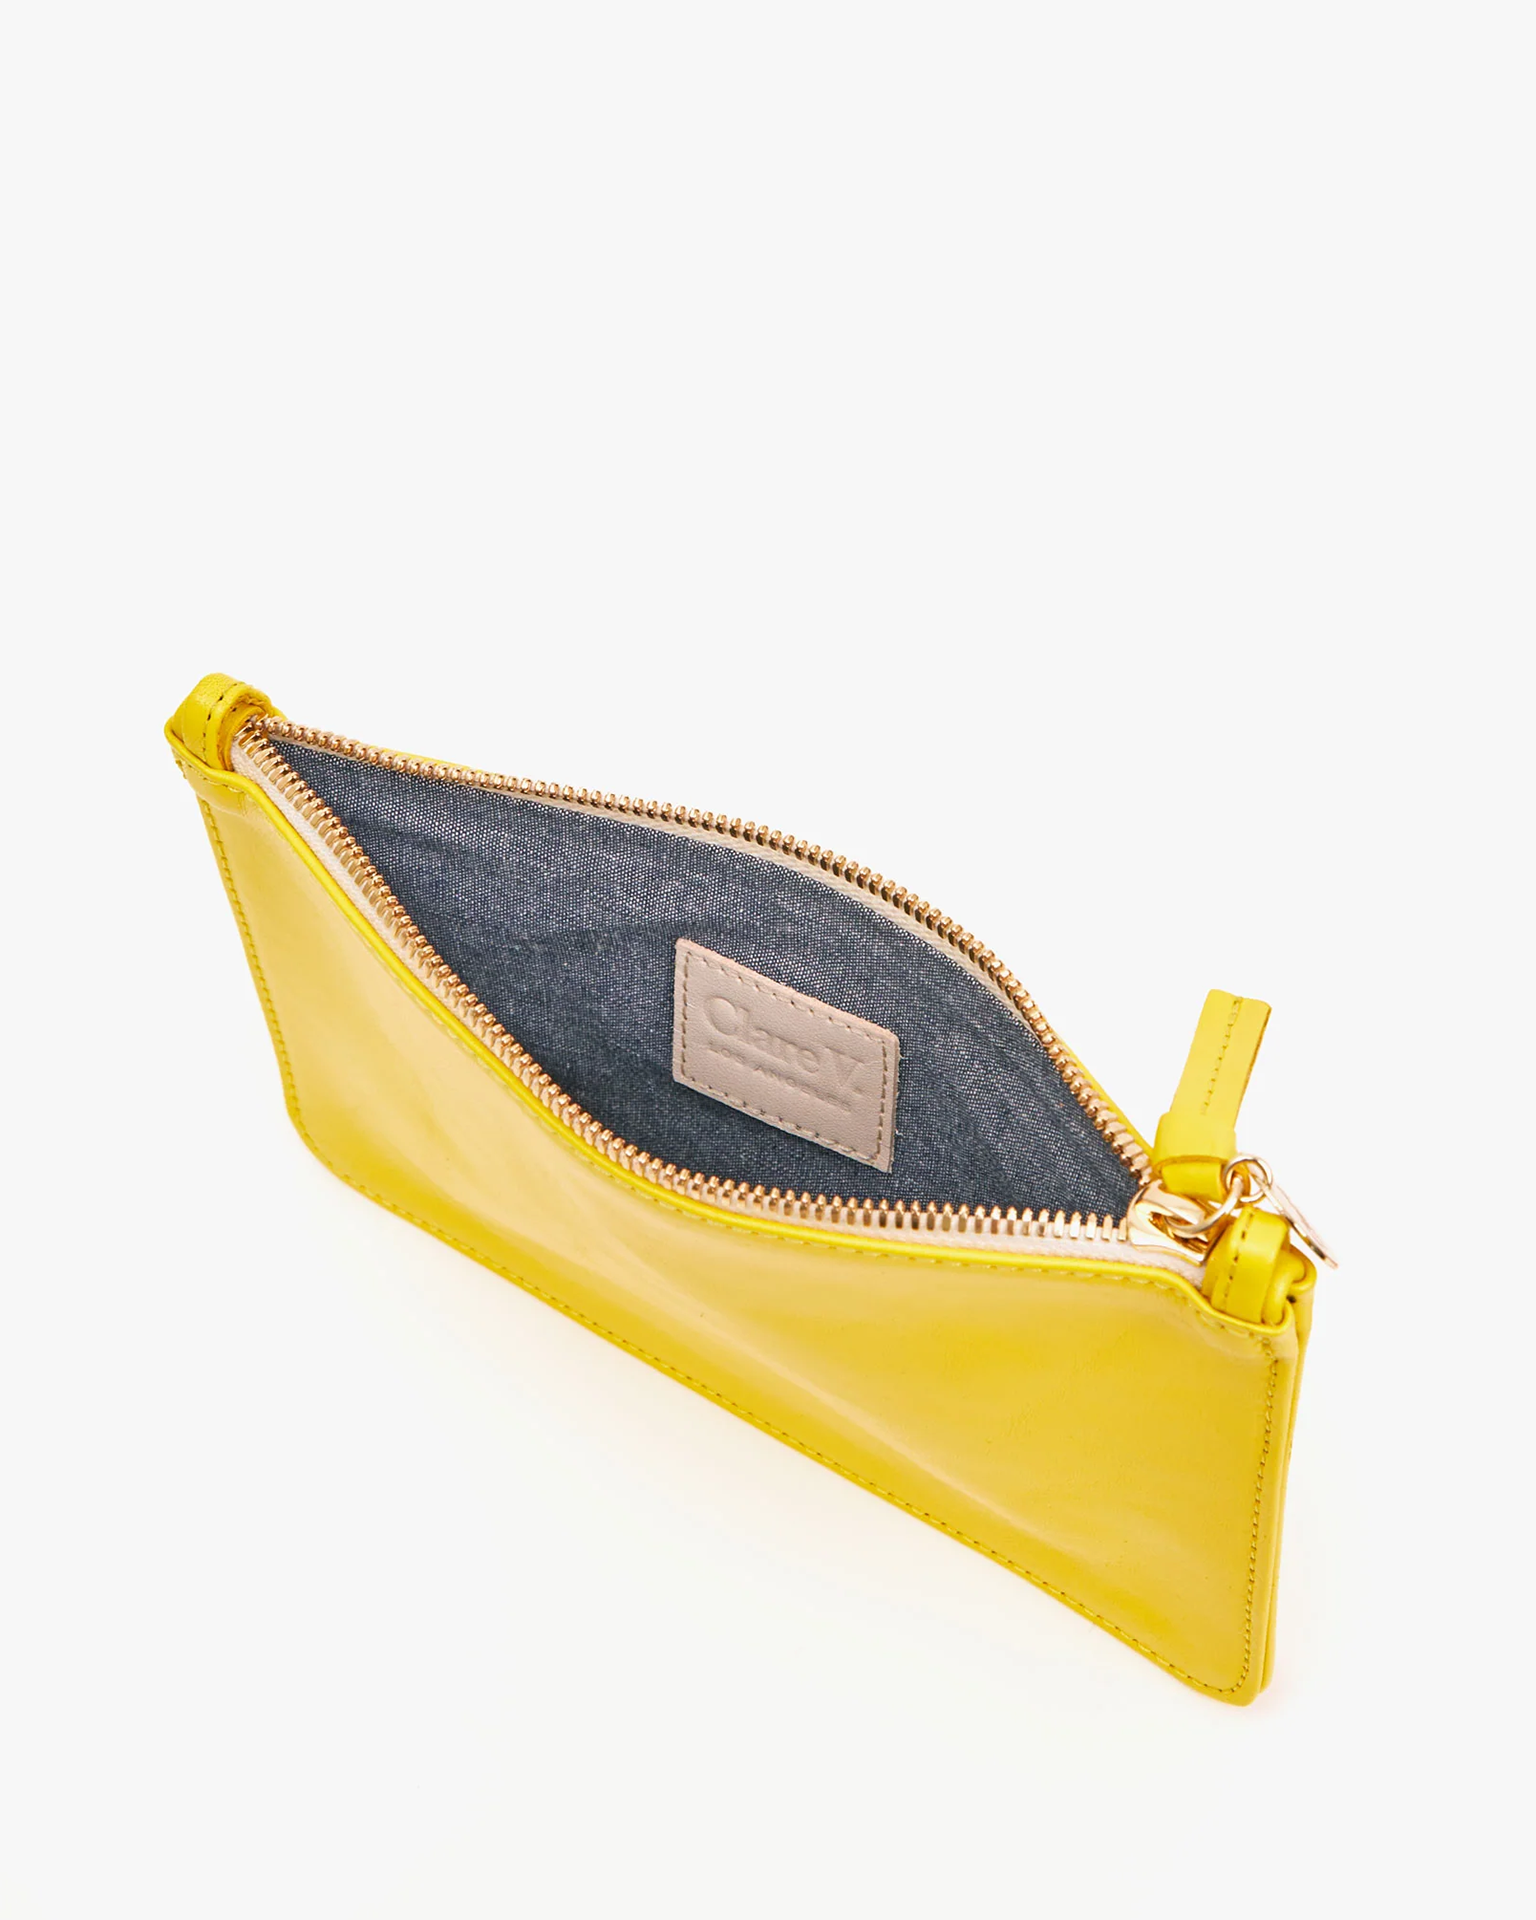 Women's Clare V. Clutches & Pouches